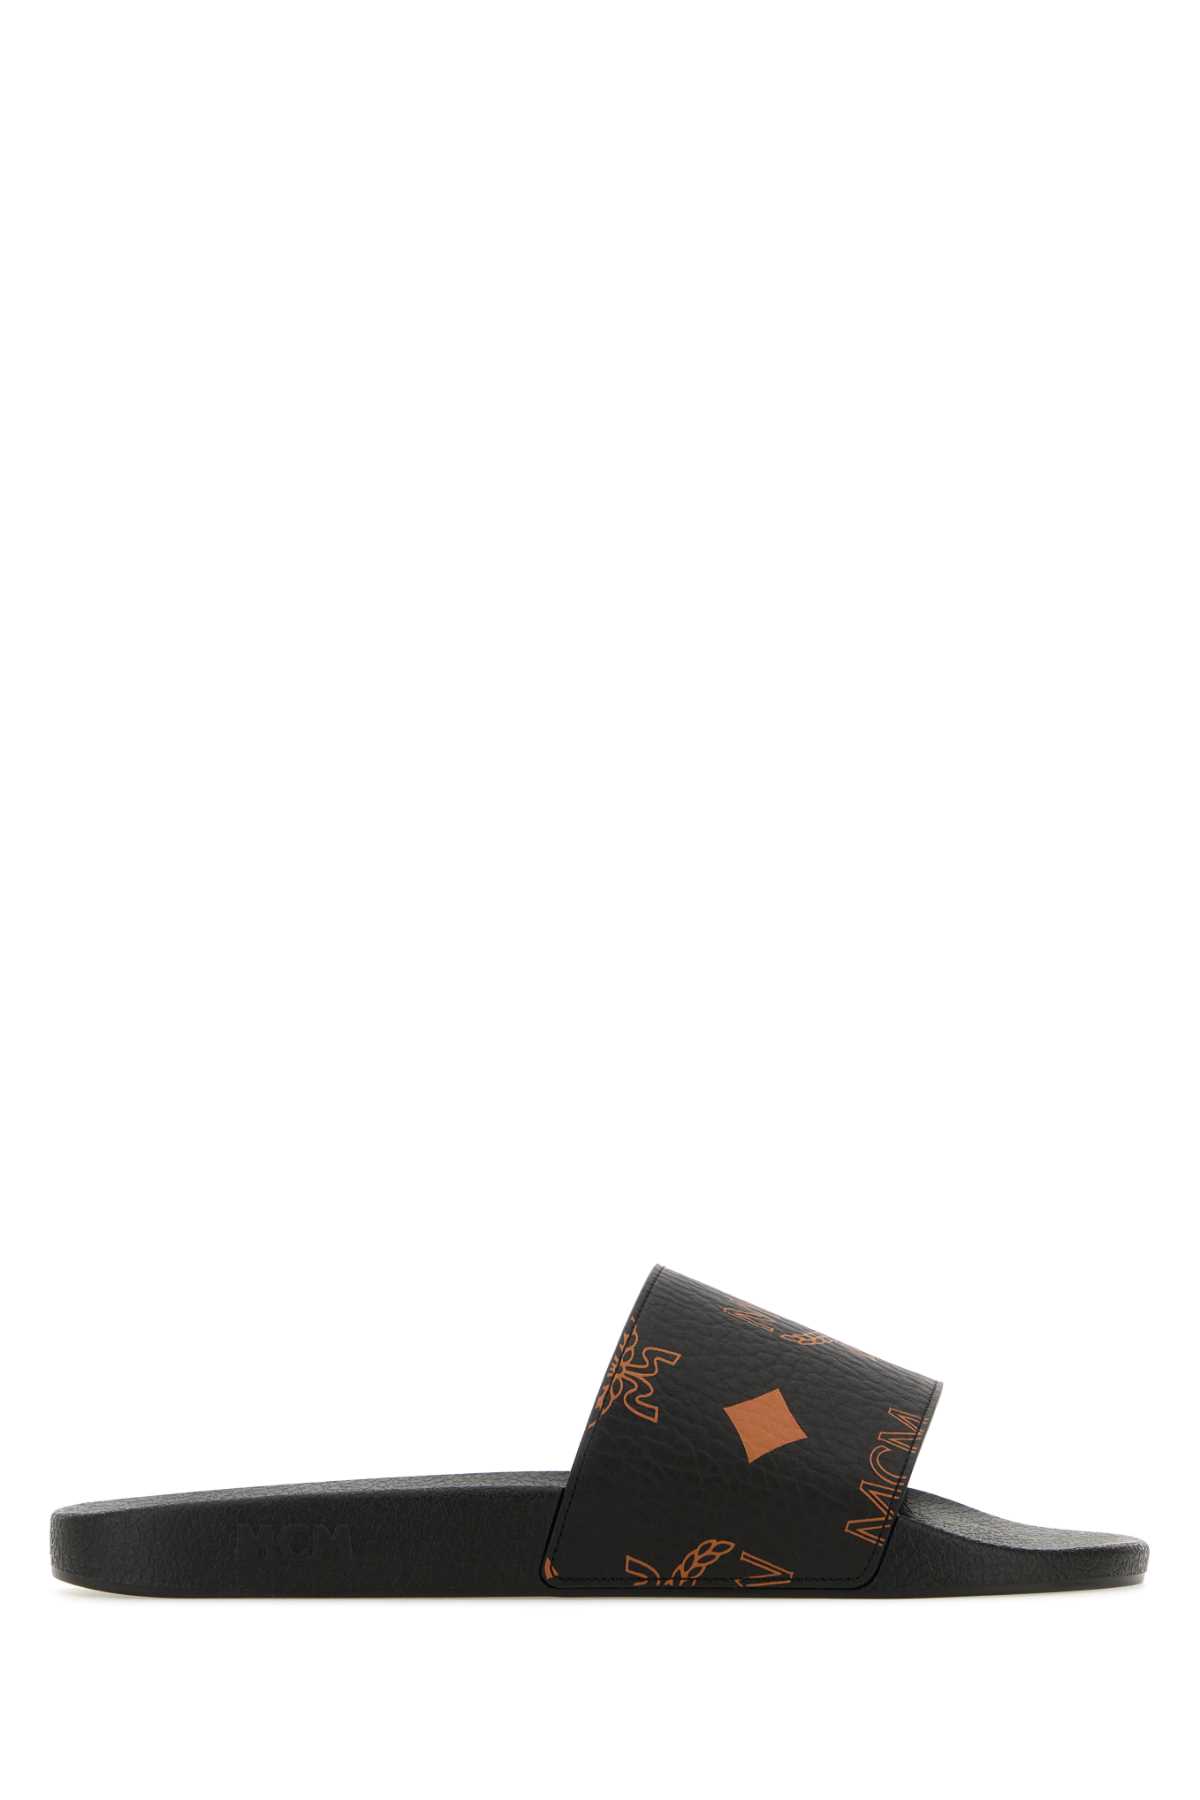 Shop Mcm Printed Canvas Slippers In Black